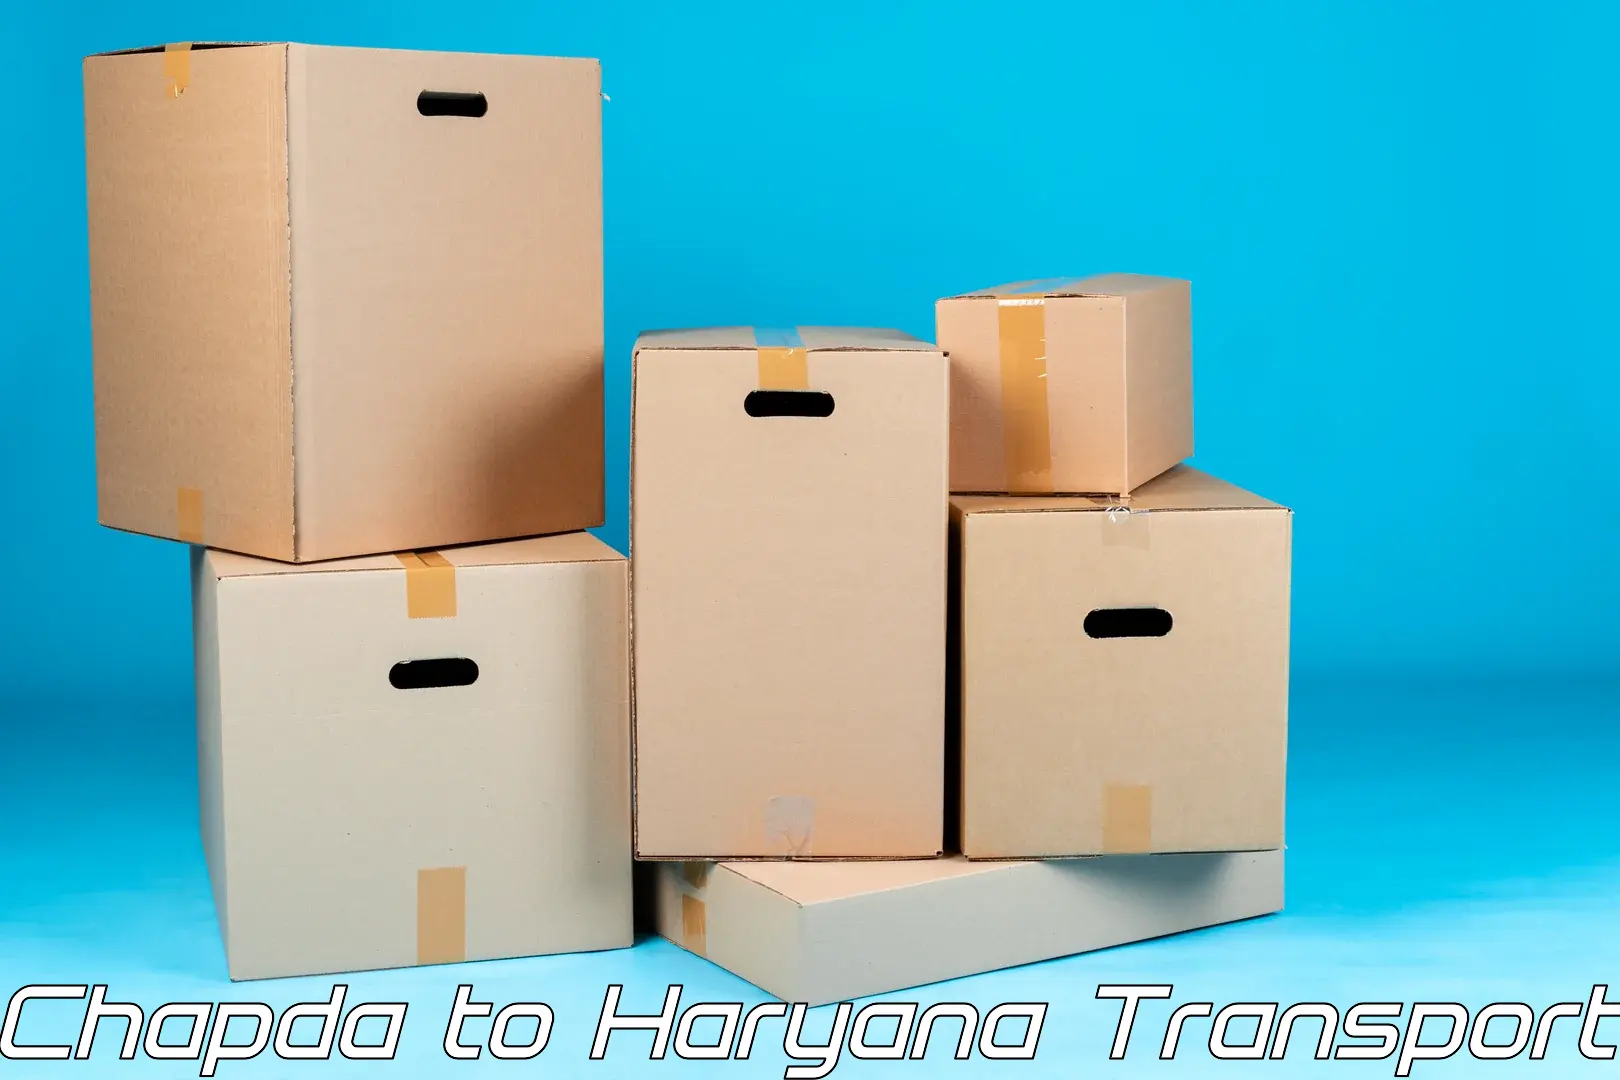 Container transport service Chapda to Gurgaon